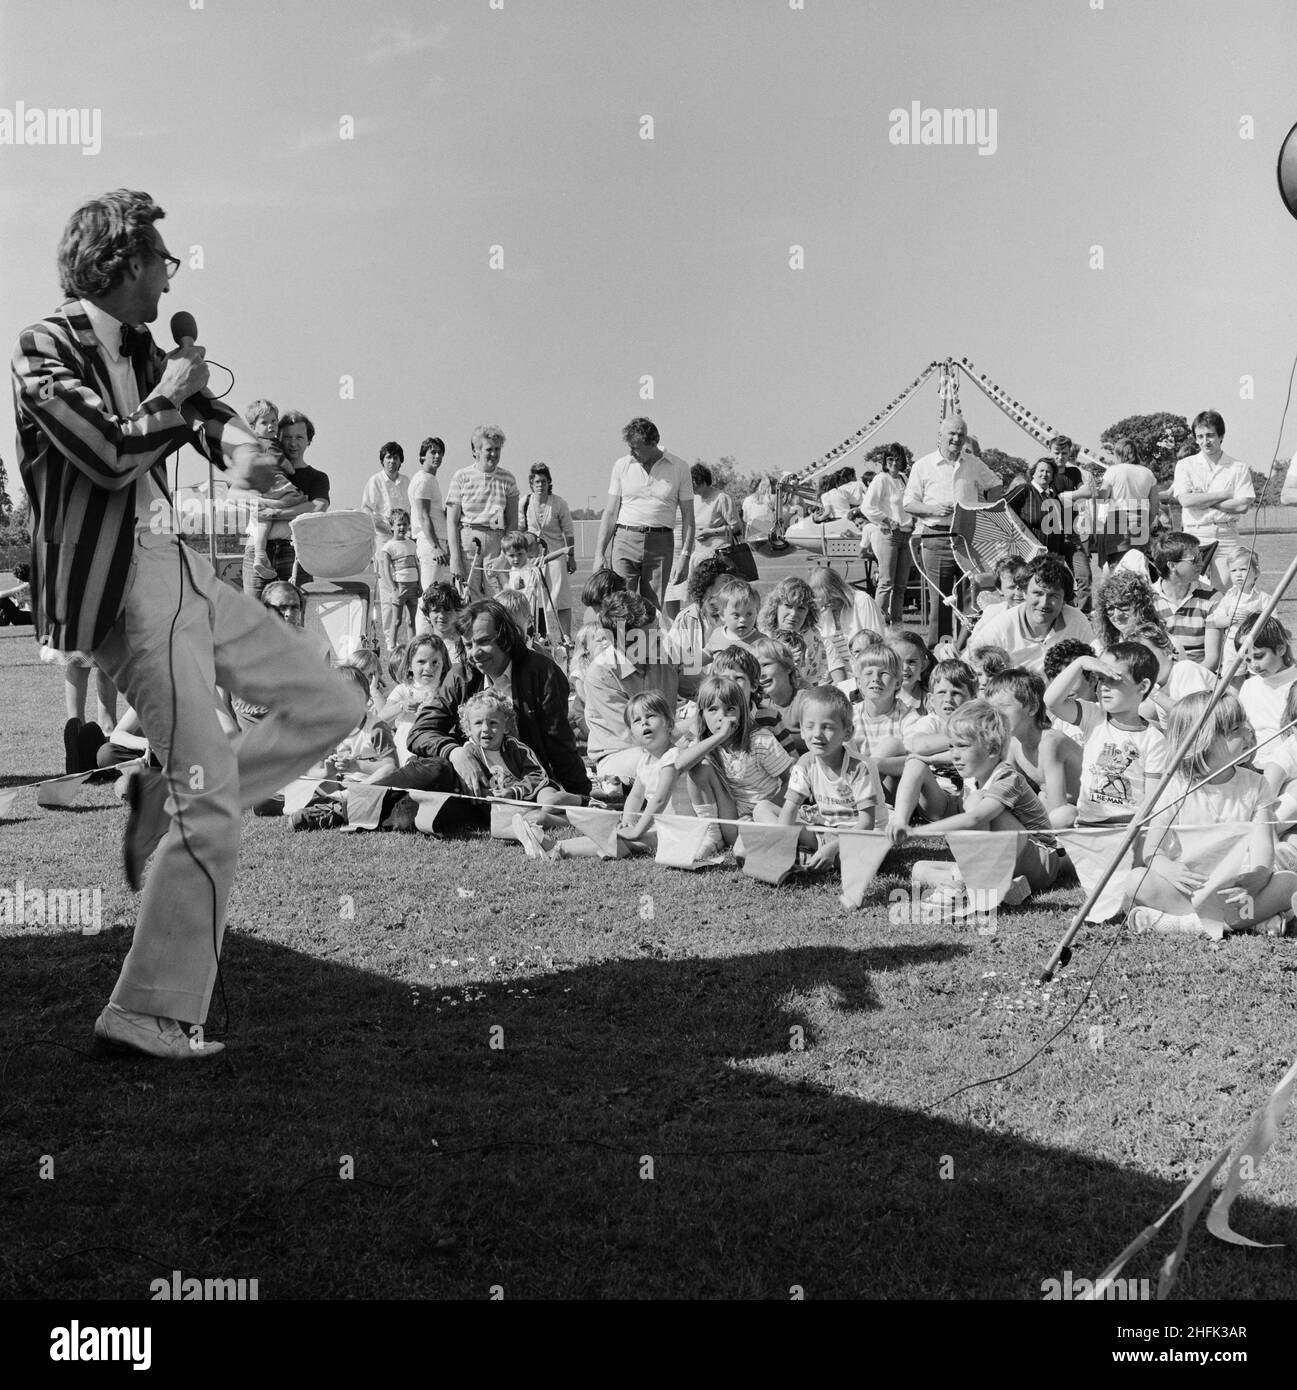 Laing Sports Ground, Rowley Lane, Elstree, Barnet, London, 21/06/1986. A man in a striped jacket, possibly 'Poz the Magician,' entertaining a crowd of children at the 1986 Family Day at Laing's Sports Ground. Over 2500 people attended the Family Day and raised over &#xa3;700 for that year's designated charity The British Heart Foundation.  Attractions included; guest appearances by the cast of the television programme Grange Hill, a bouncy castle, donkey rides, Punch and Judy shows, Pierre the Clown, children's races, blindfold stunt driving and golf and six-a-side football tournaments. Stock Photo